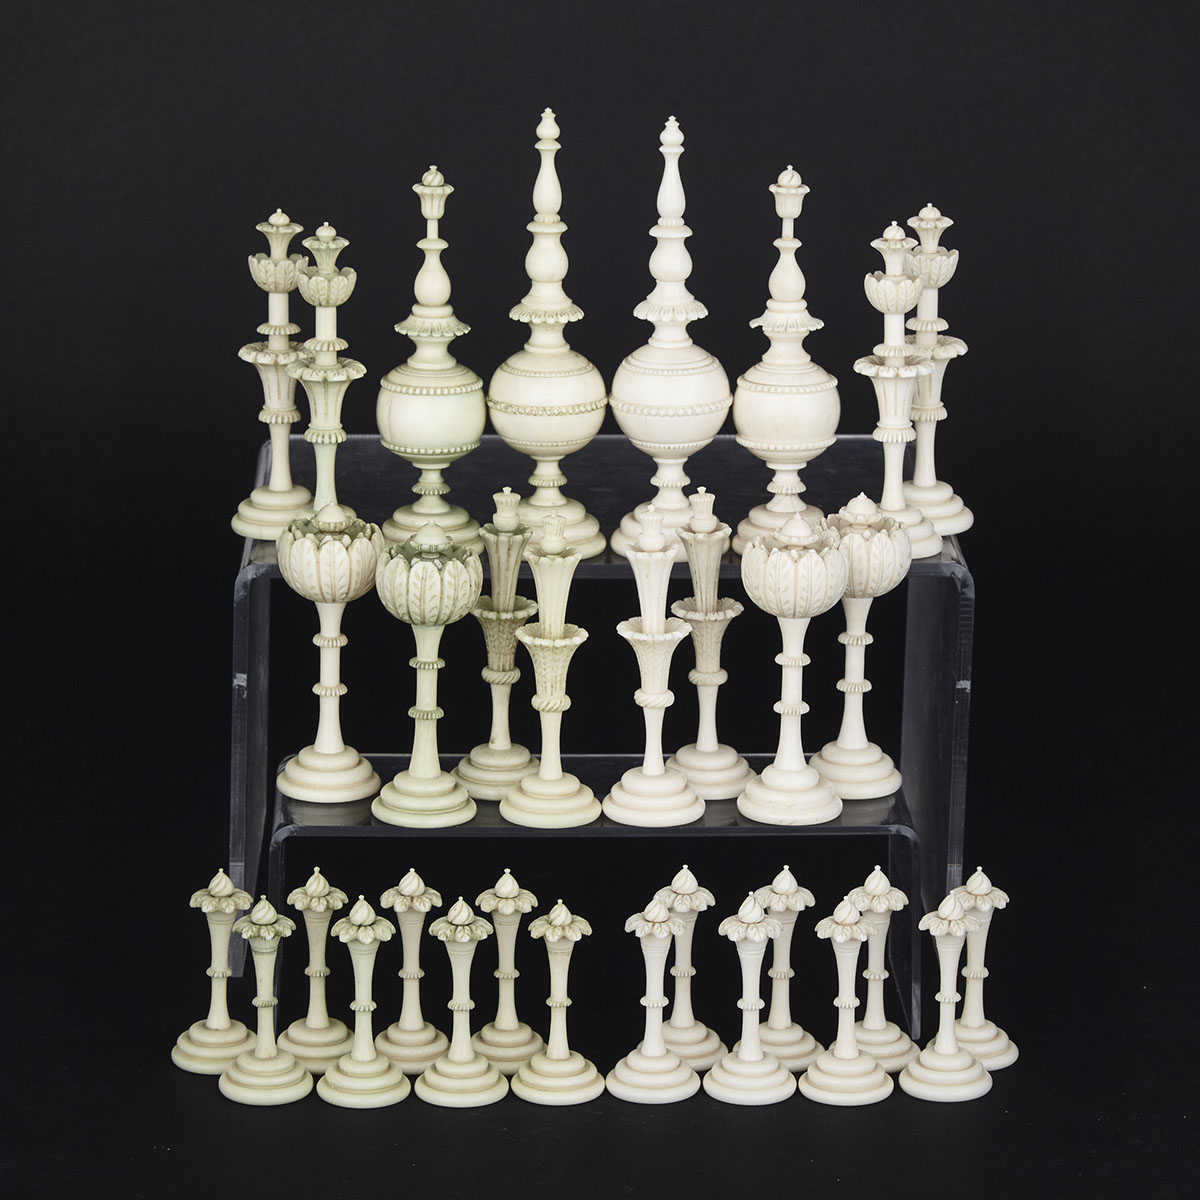 Large Turkish Turned and Carved Ivory ‘Tulip’ Chess Set, early 19th century